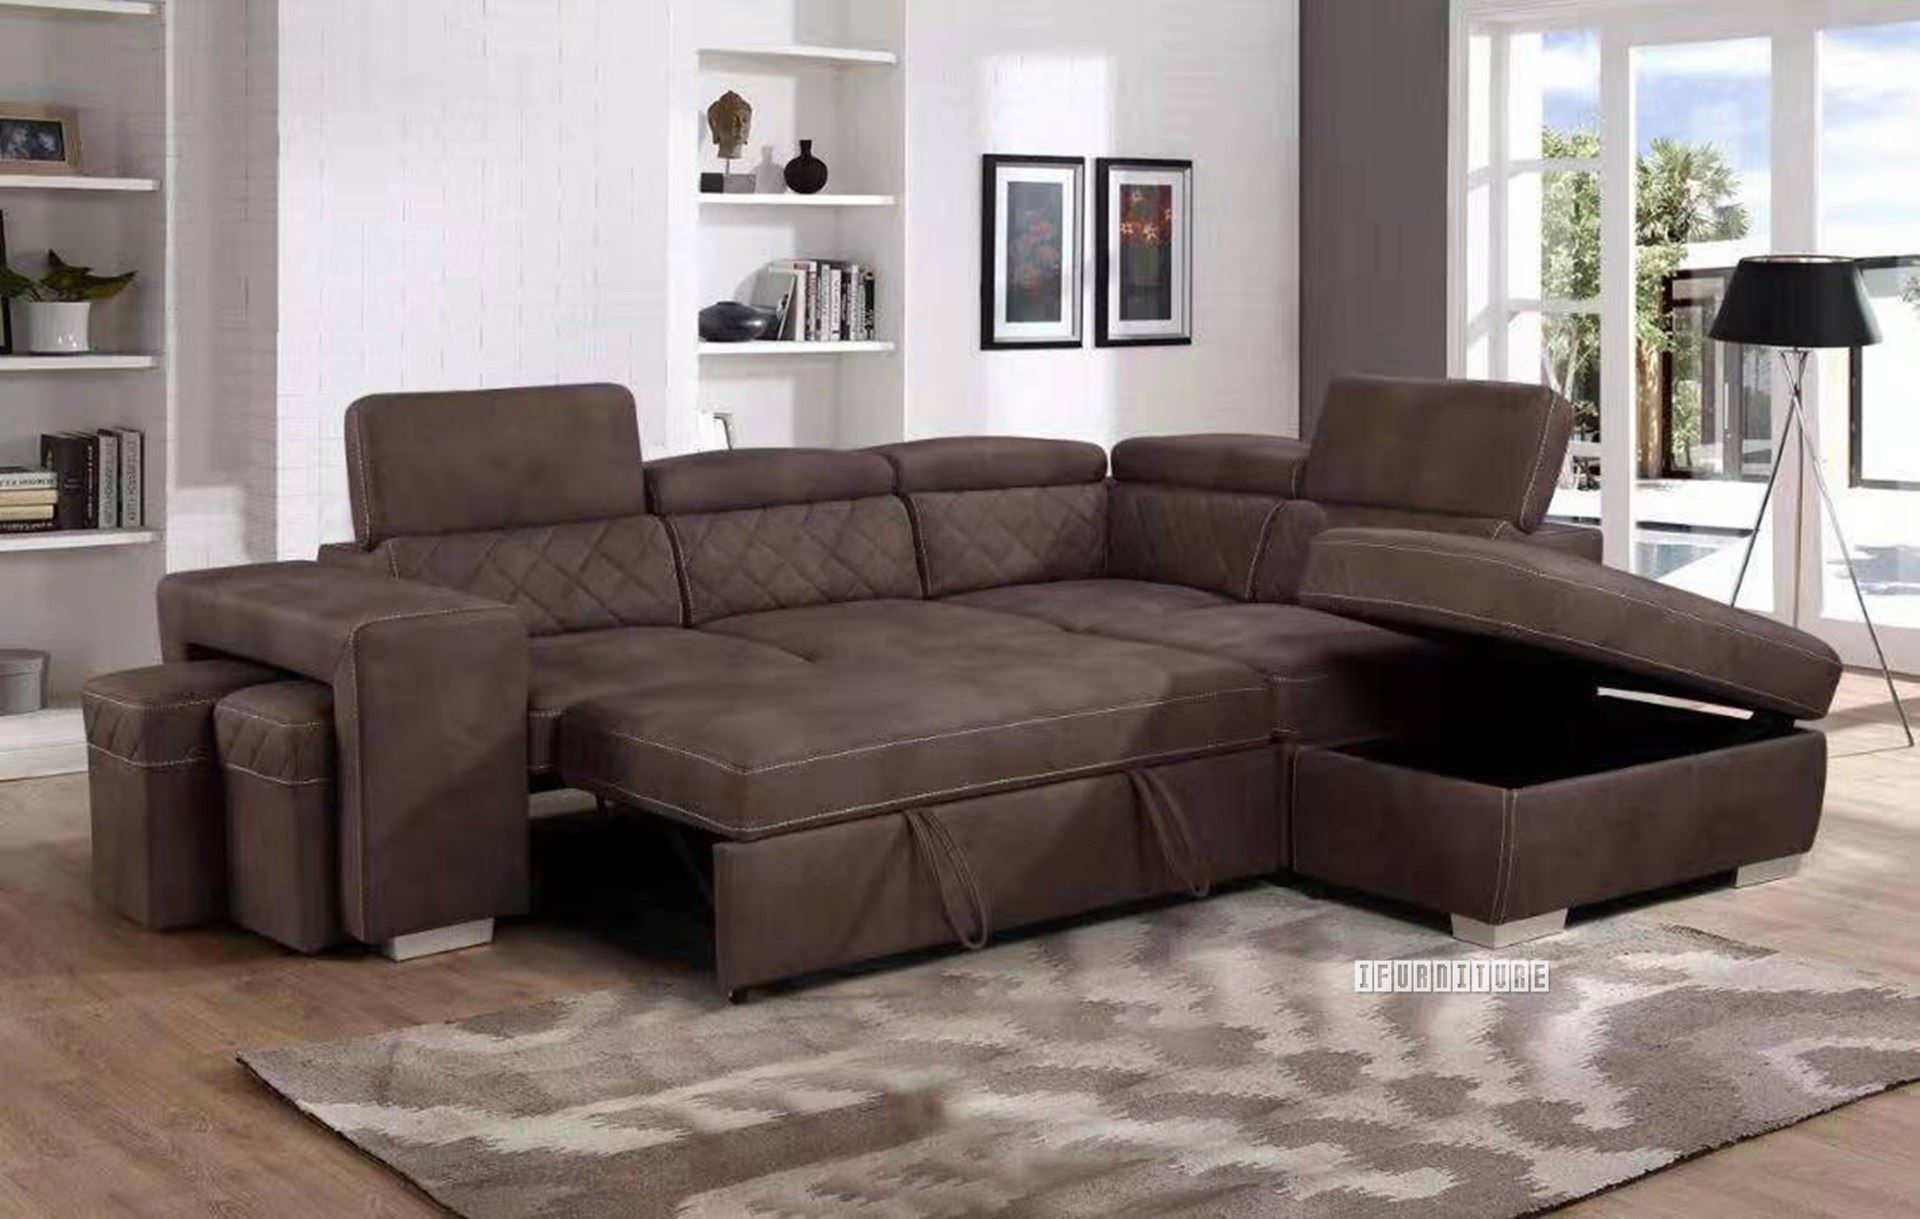 Aria Sectional Sofa/sofa Bed With Storage & 2 Ottomans (brown) Intended For Sofas With Ottomans In Brown (Gallery 15 of 20)